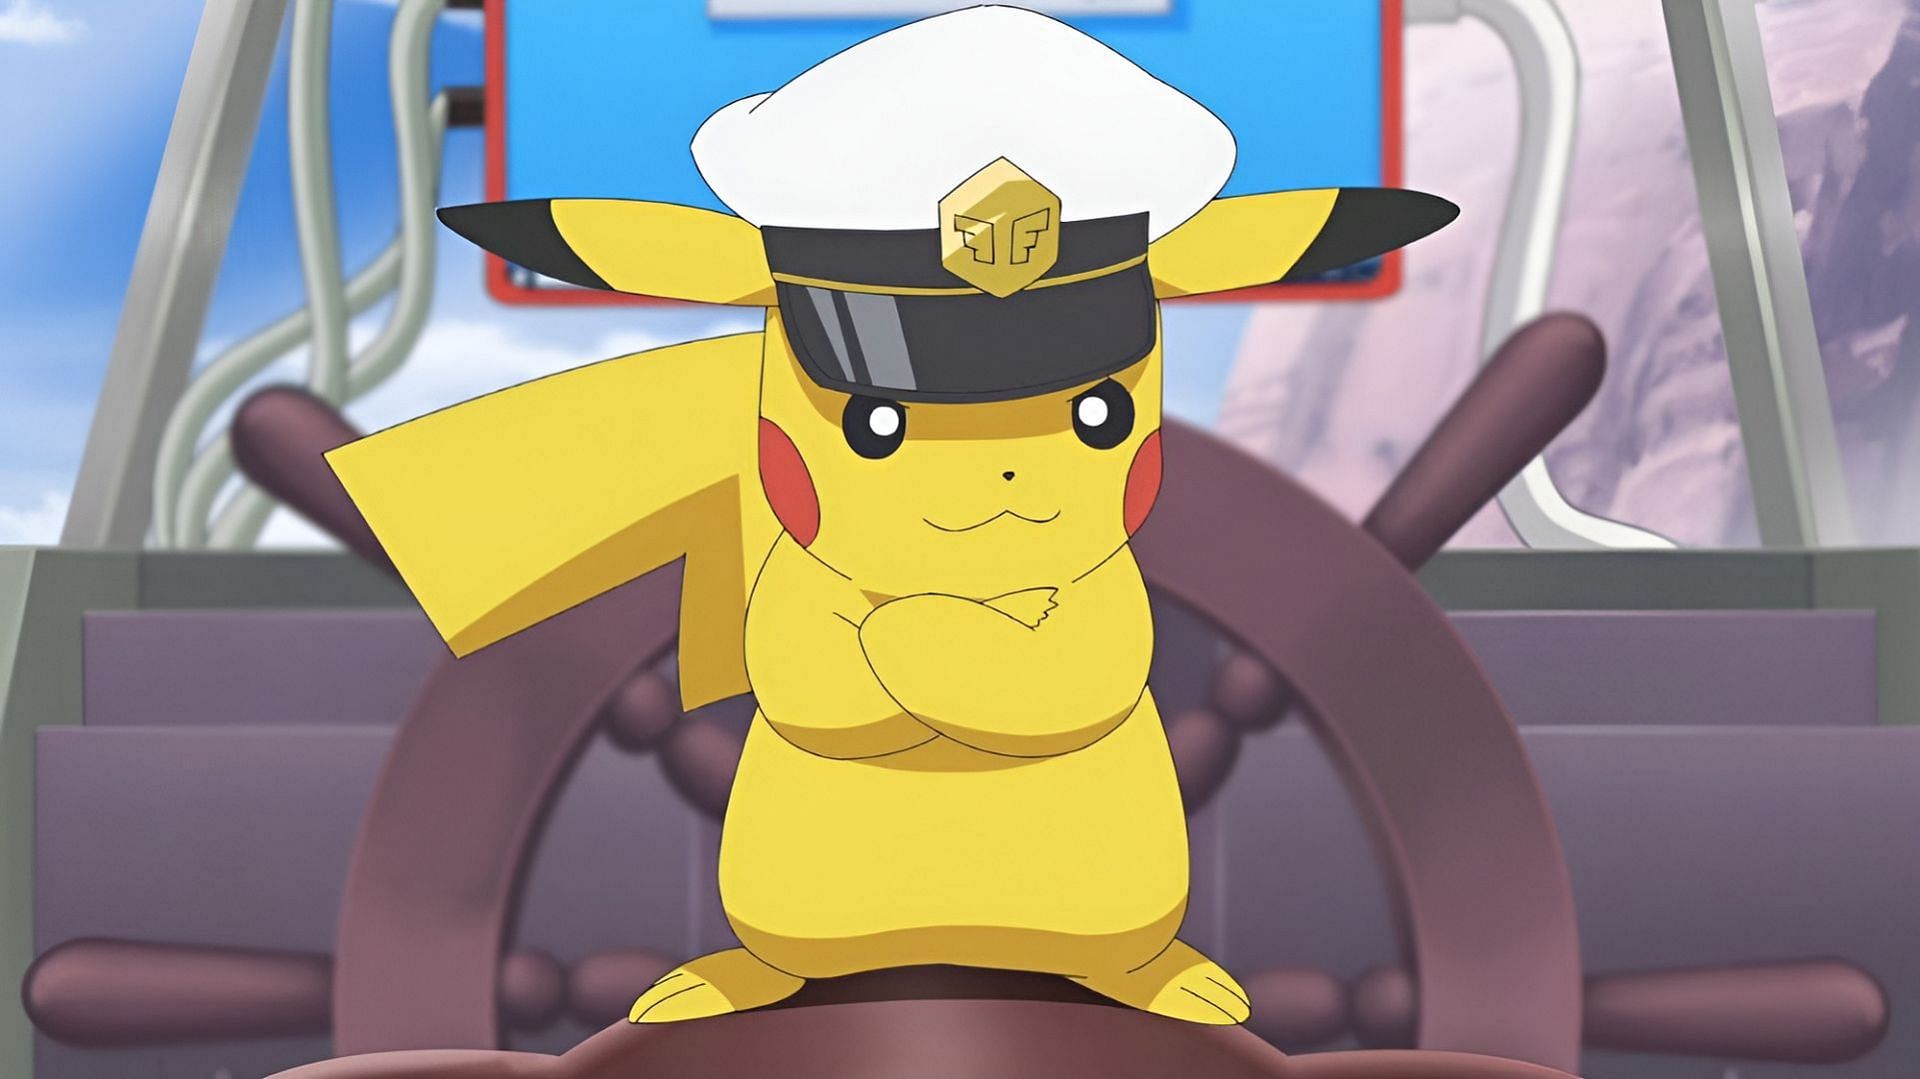 Airline pilots get excellent access to regional species in Pokemon GO (Image via The Pokemon Company)